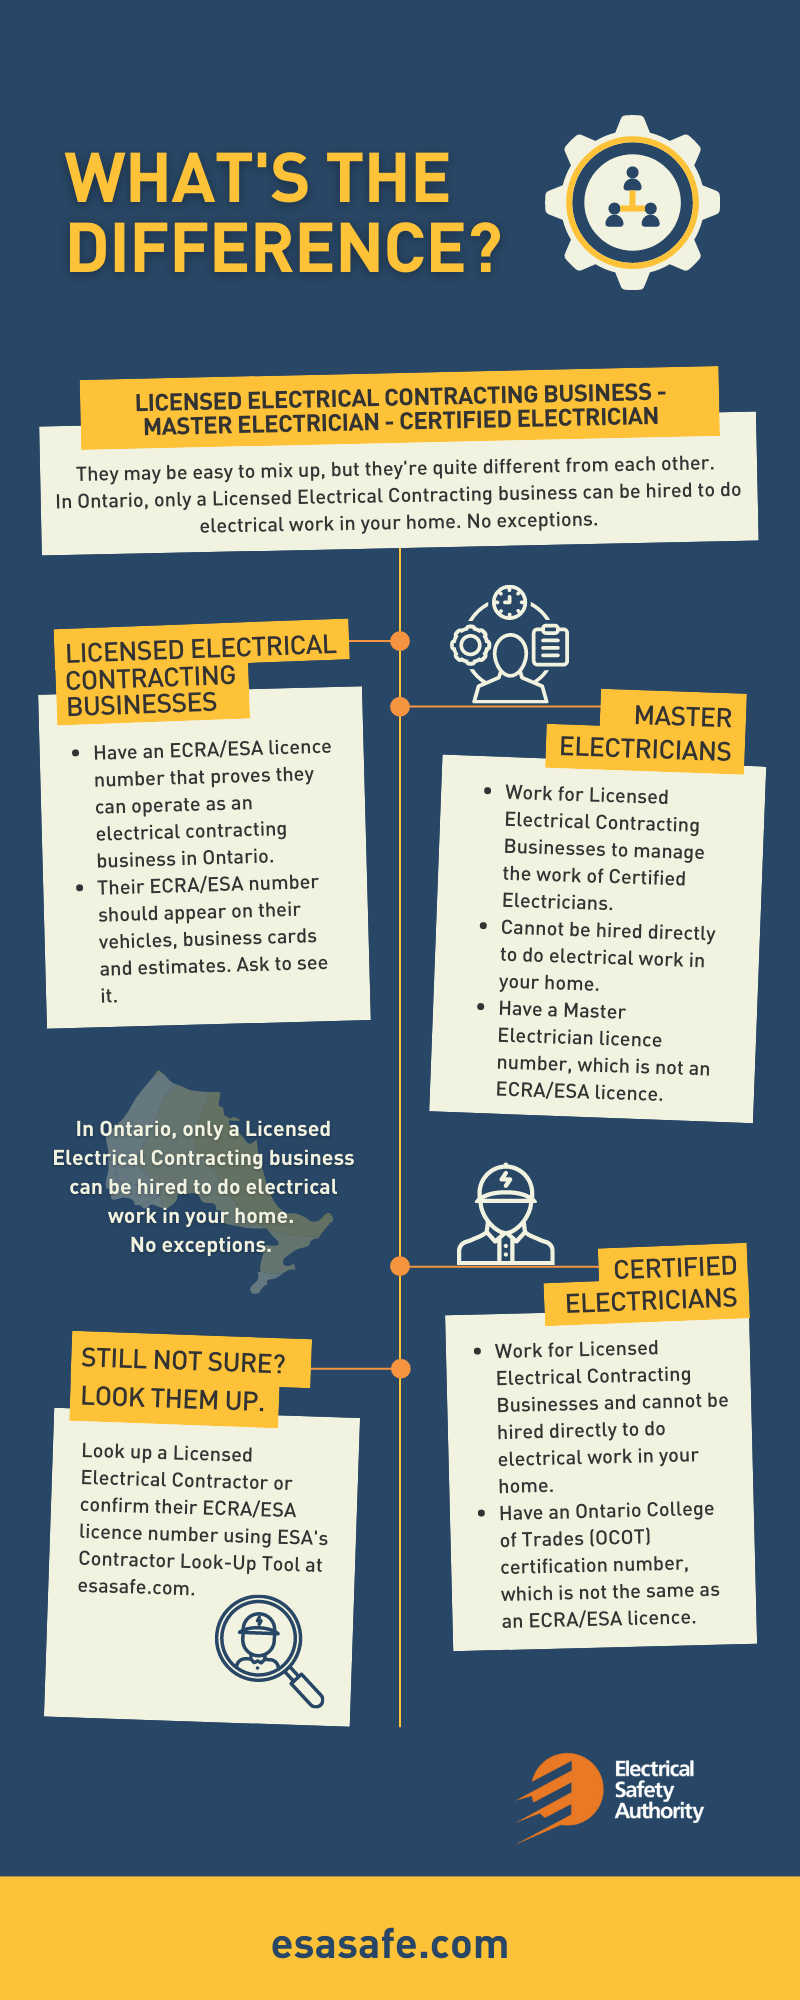 Review differences between Licensed Electrical Contracting businesses, Certified Electricians, and Master Electricians